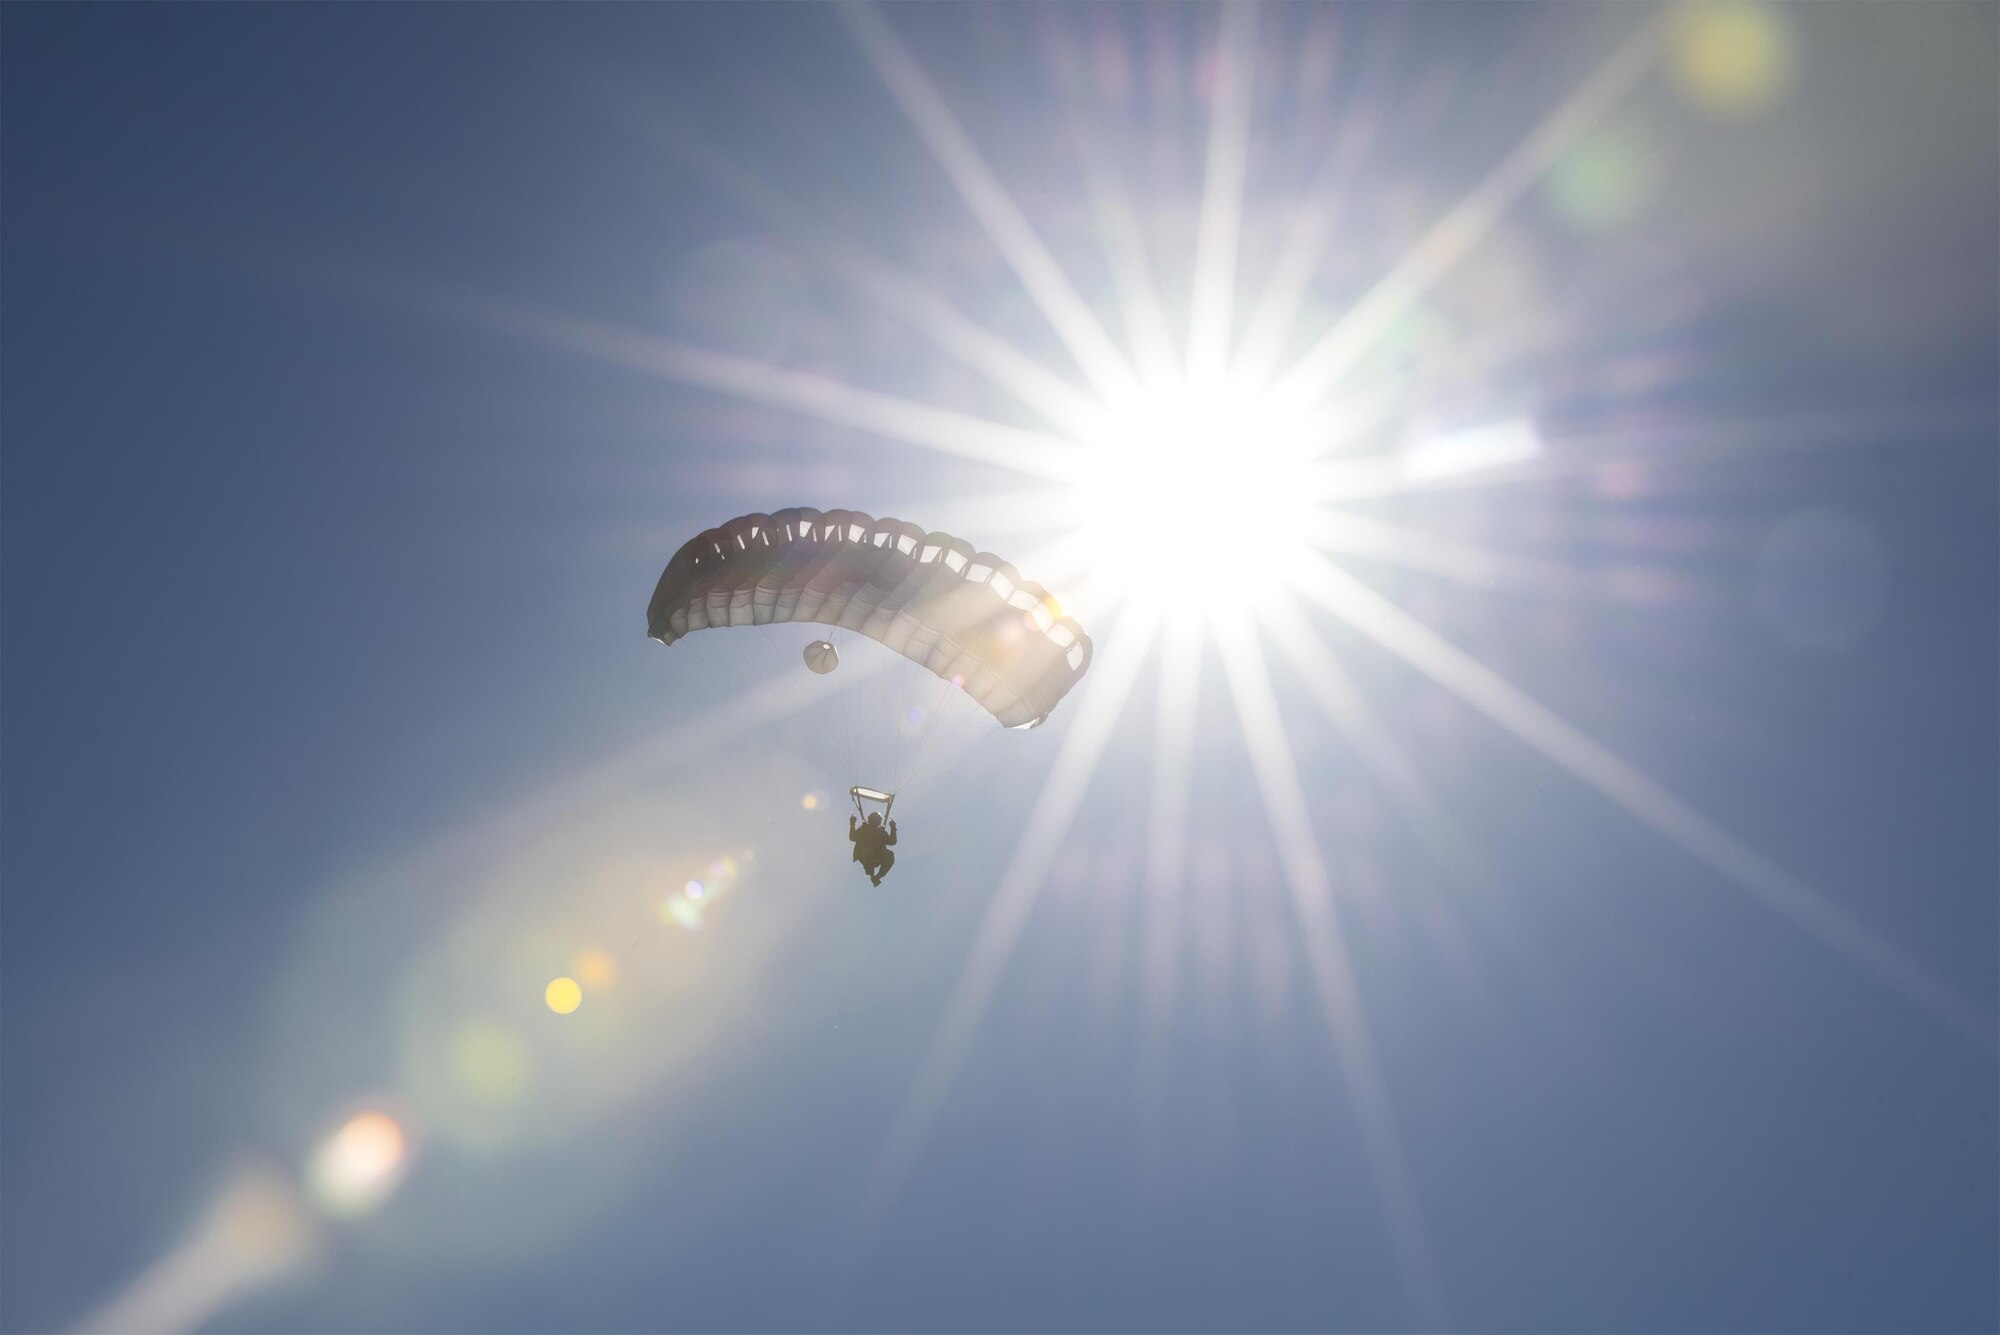 A Pararescuman from the 38th Rescue Squadron floats to the ground during a high-altitude, low-opening jump, Aug. 18, 2016, at Moody Air Force Base, Ga. After jumping from an altitude of nearly 25,000 feet, the Airmen fell for approximately three minutes before opening their parachutes for this training. (U.S. Air Force photo by Airman 1st Class Daniel Snider)
